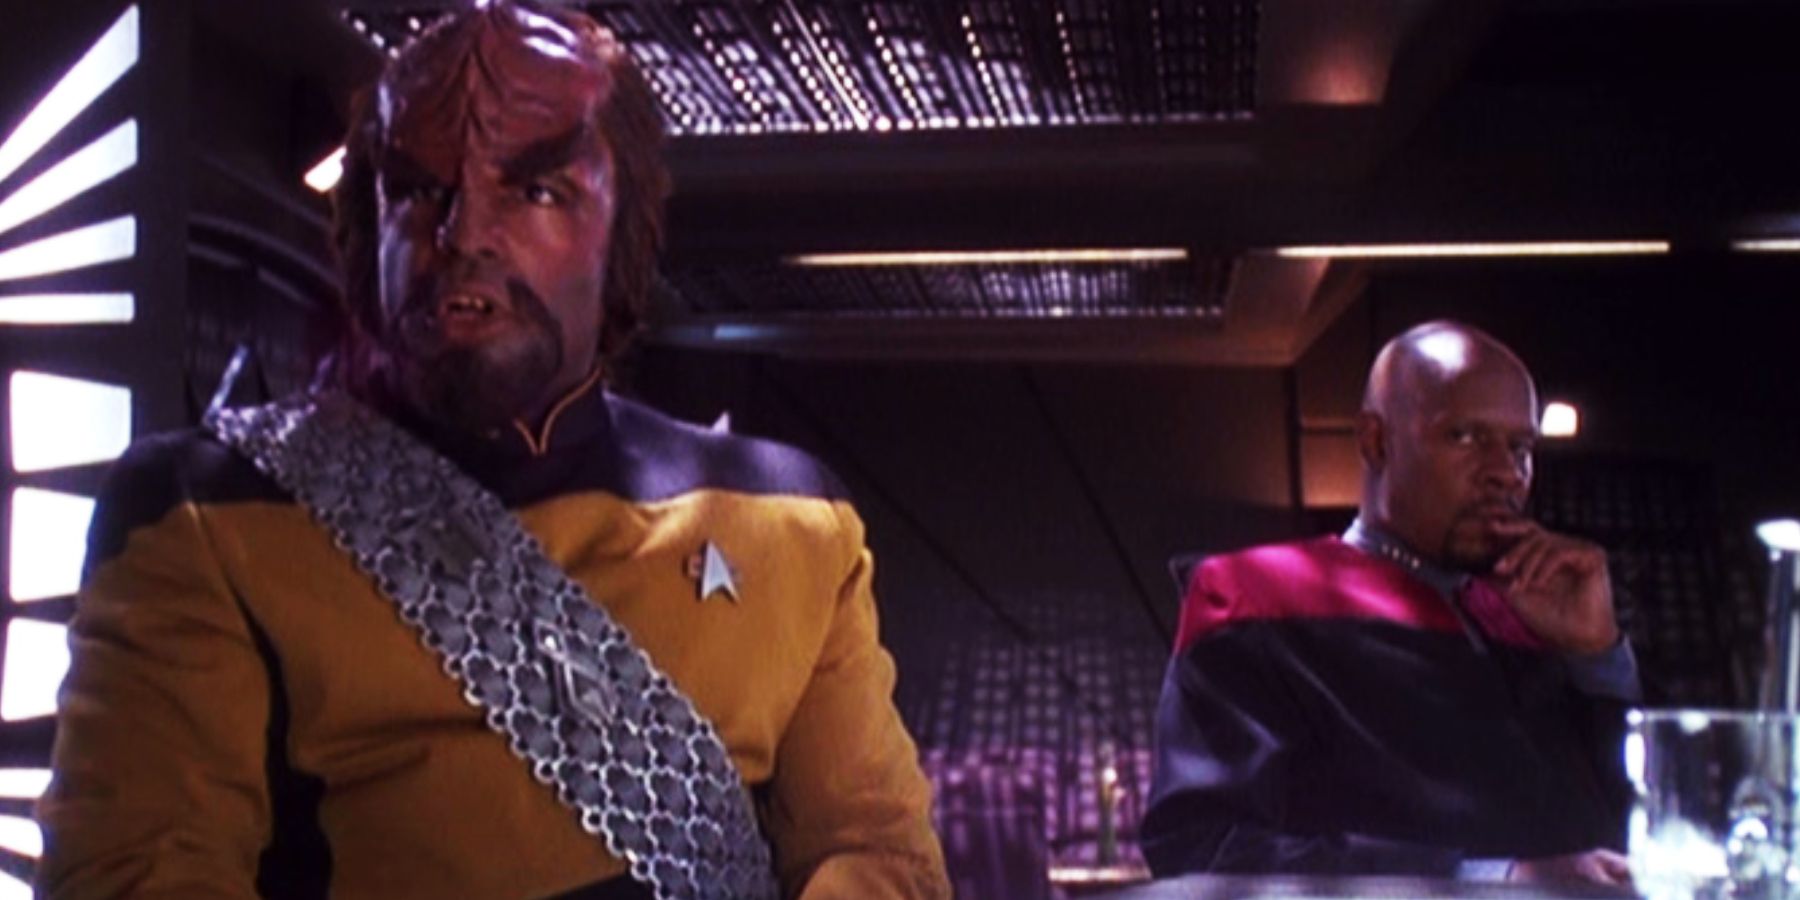 Michael Dorn as Worf and Avery Brooks as Sisko in Way of the Warrior